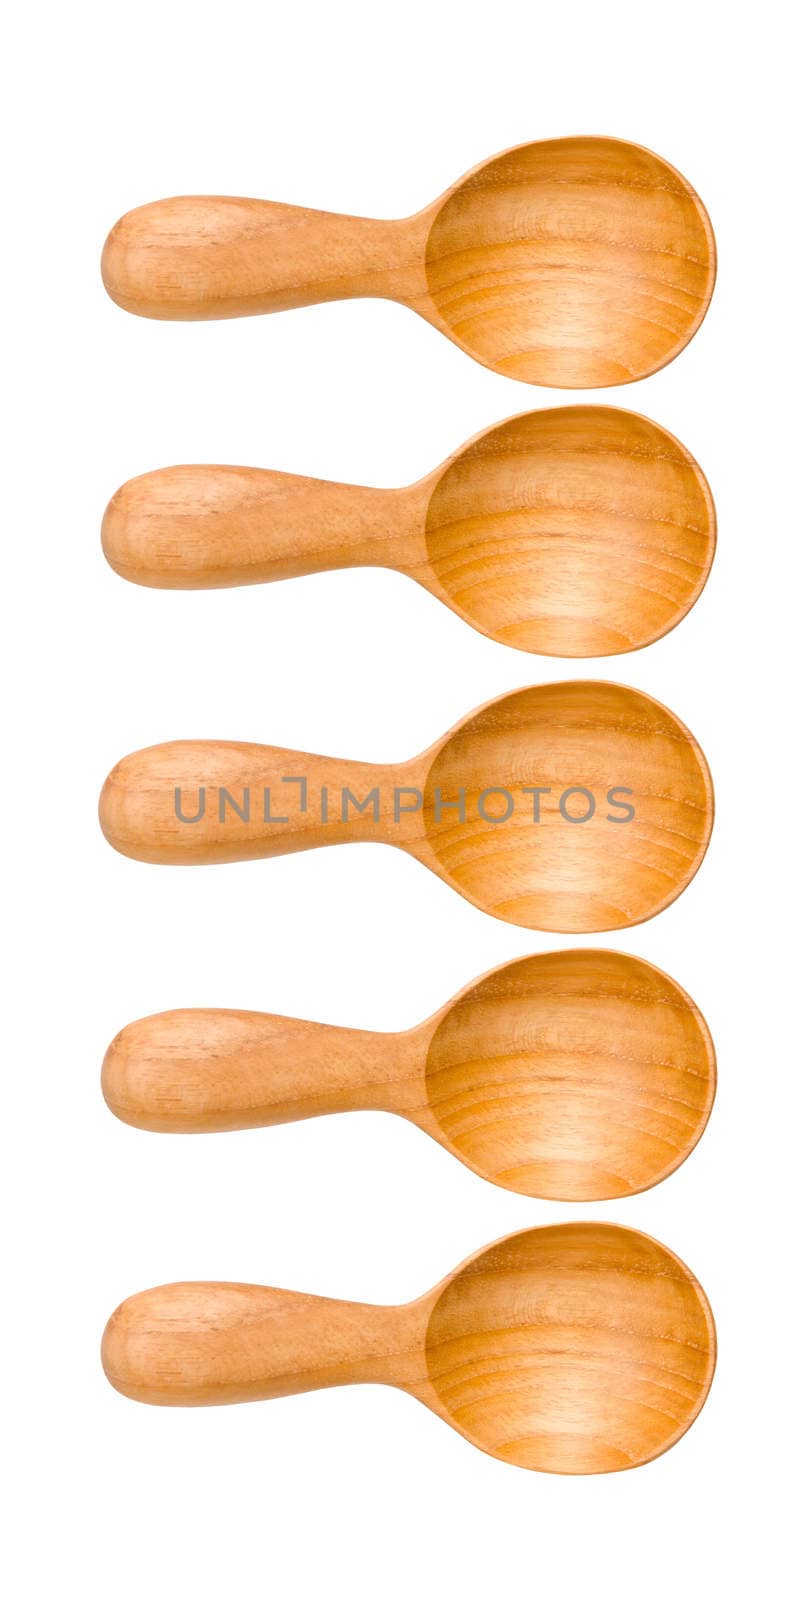 Isolated many wooden Kitchen spoons on white background, clipping path